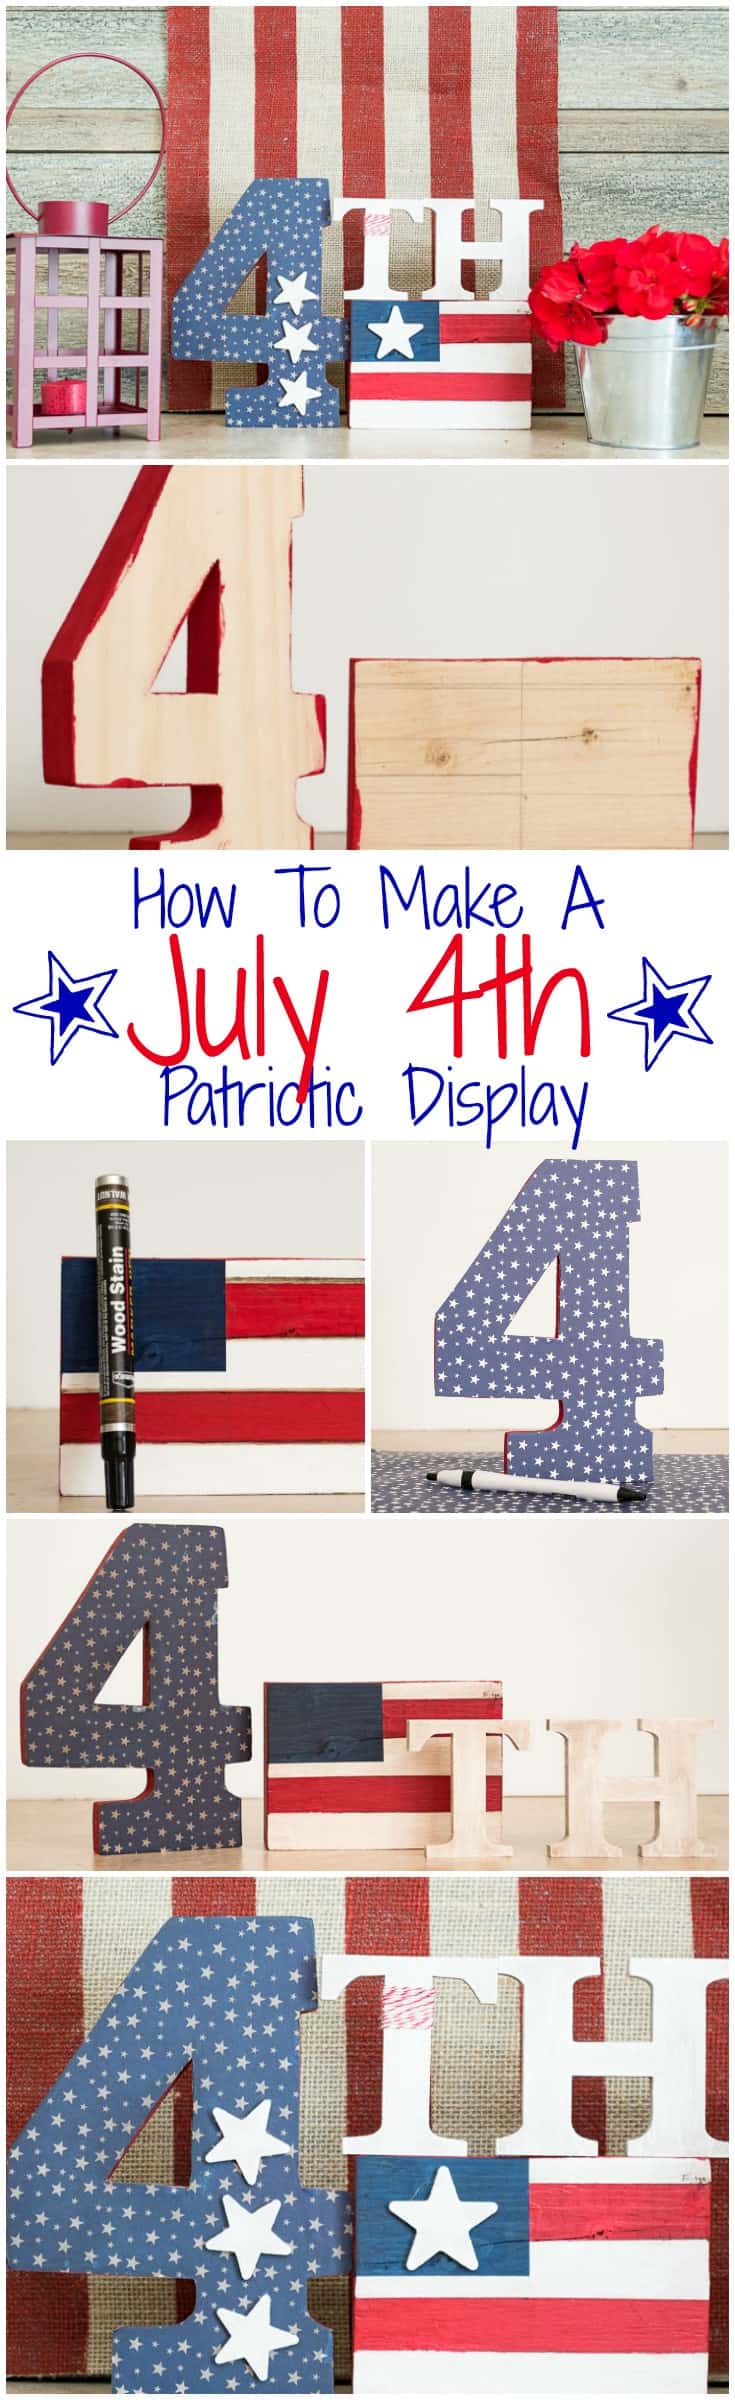 How to make a Patriotic Craft For Memorial Day, Flag Day And July 4th poster.